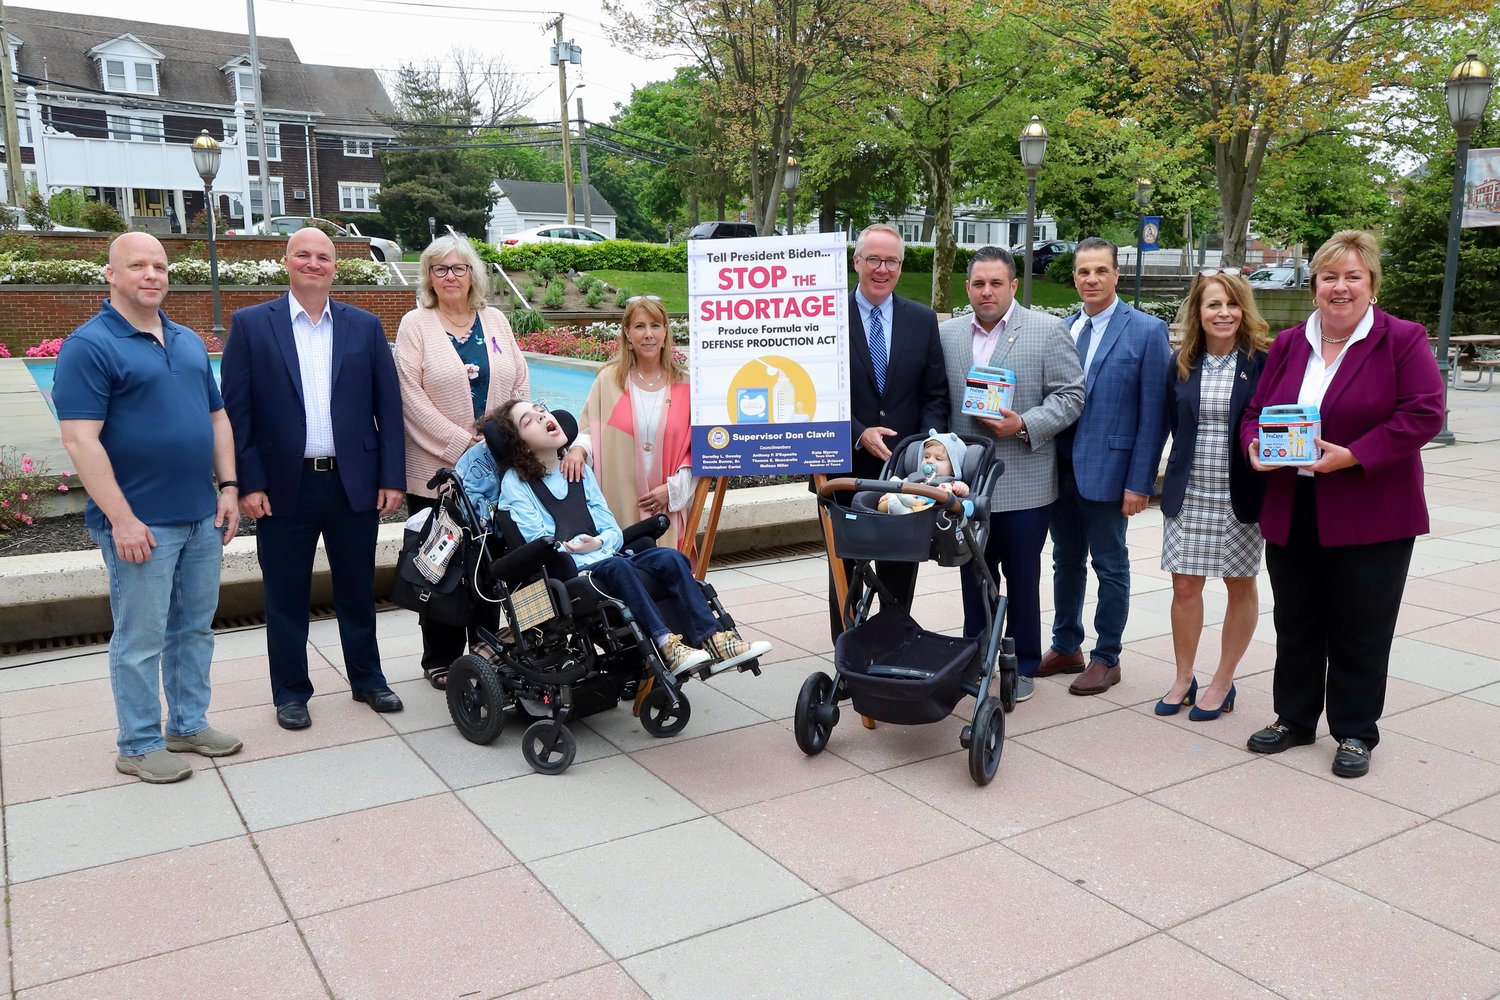 Hempstead town officials and parents called on Congress to speed up production of baby formula. Among those making the statement were, from left, John Caputo of Lynbrook, Councilman Chris Carini, Legislator Denise Ford, Oliver Miller and mother Councilwoman Melissa Miller, Town of Hempstead Supervisor Don Clavin, Councilman Anthony D’Esposito, Councilman Tom Muscarella, Receiver of Taxes Jeanine Driscoll and town clerk Kate Murray.